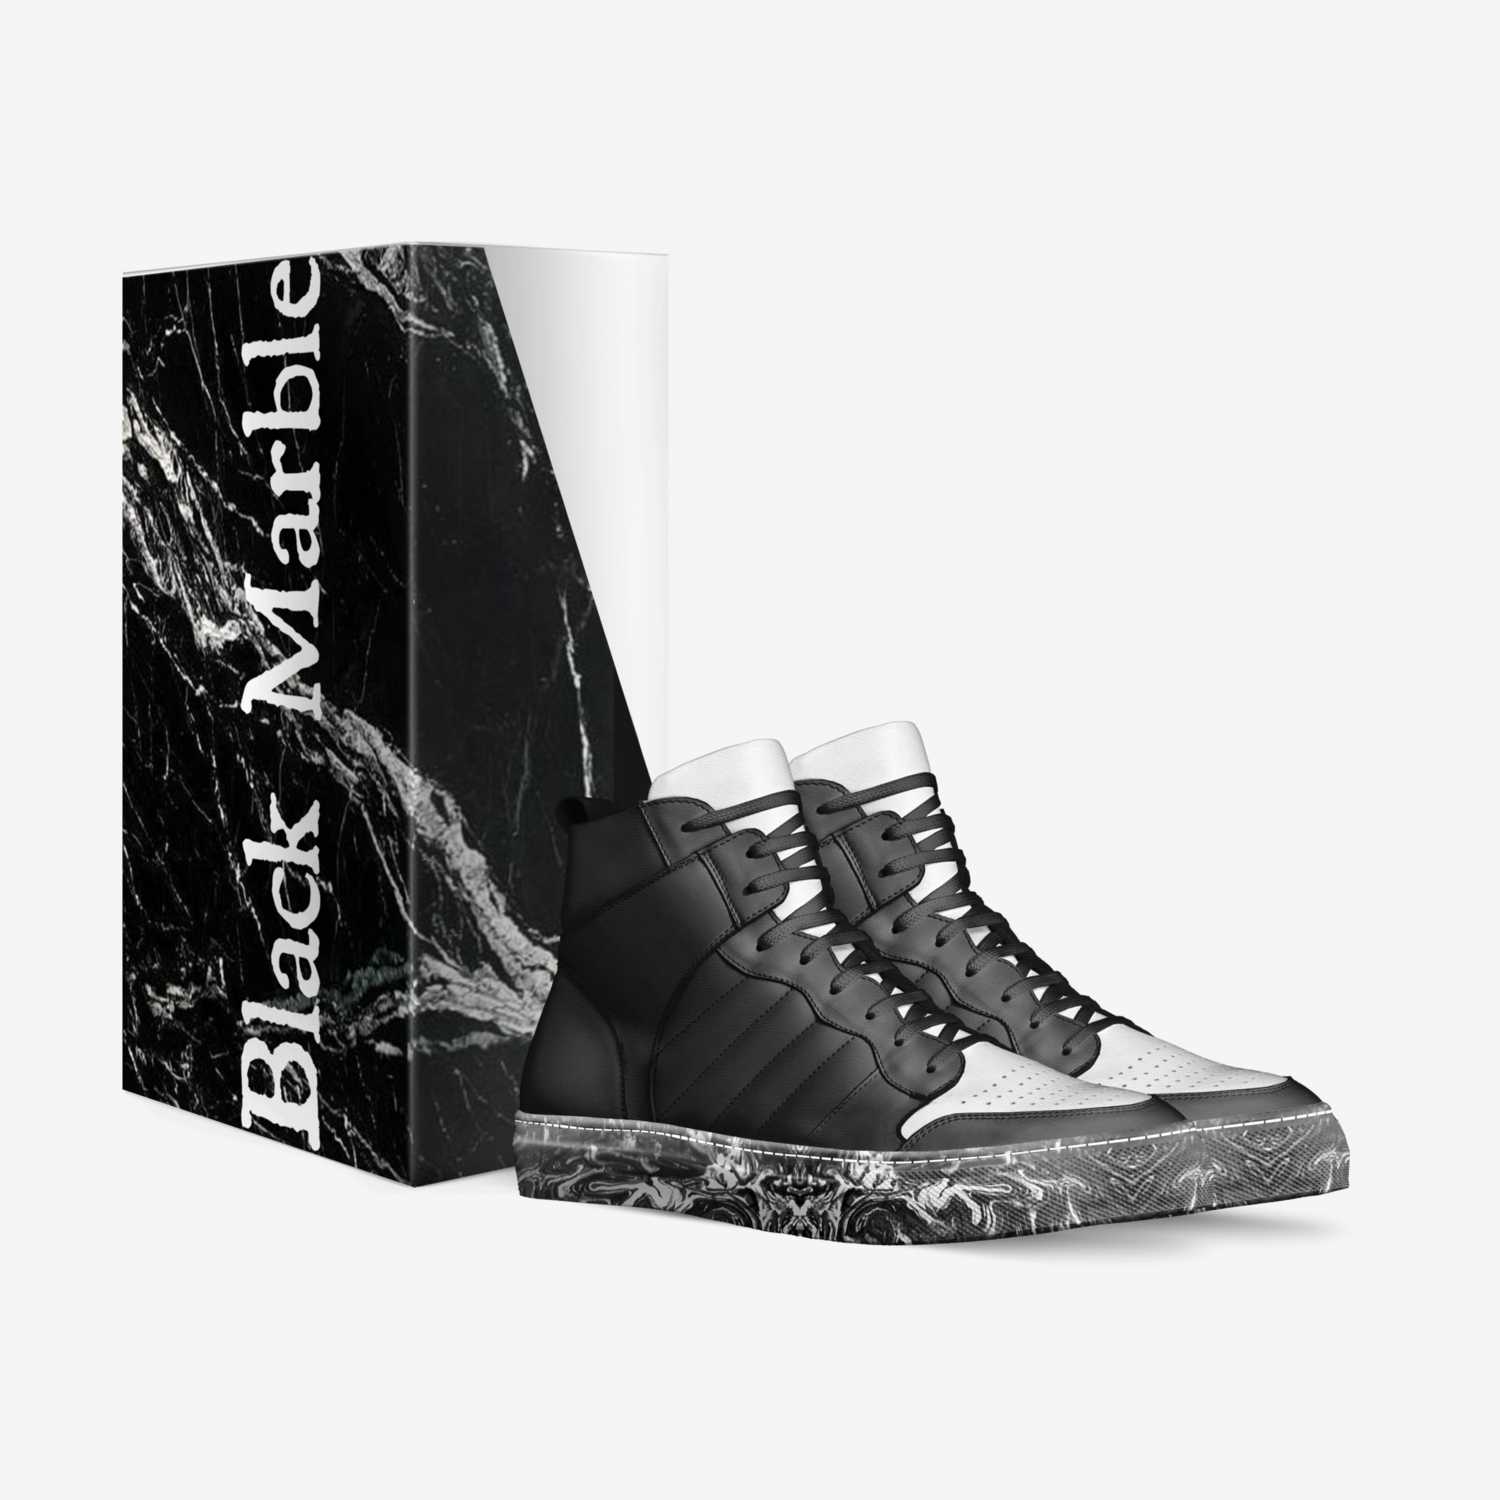 Black Marble custom made in Italy shoes by Maneesh Chatman | Box view